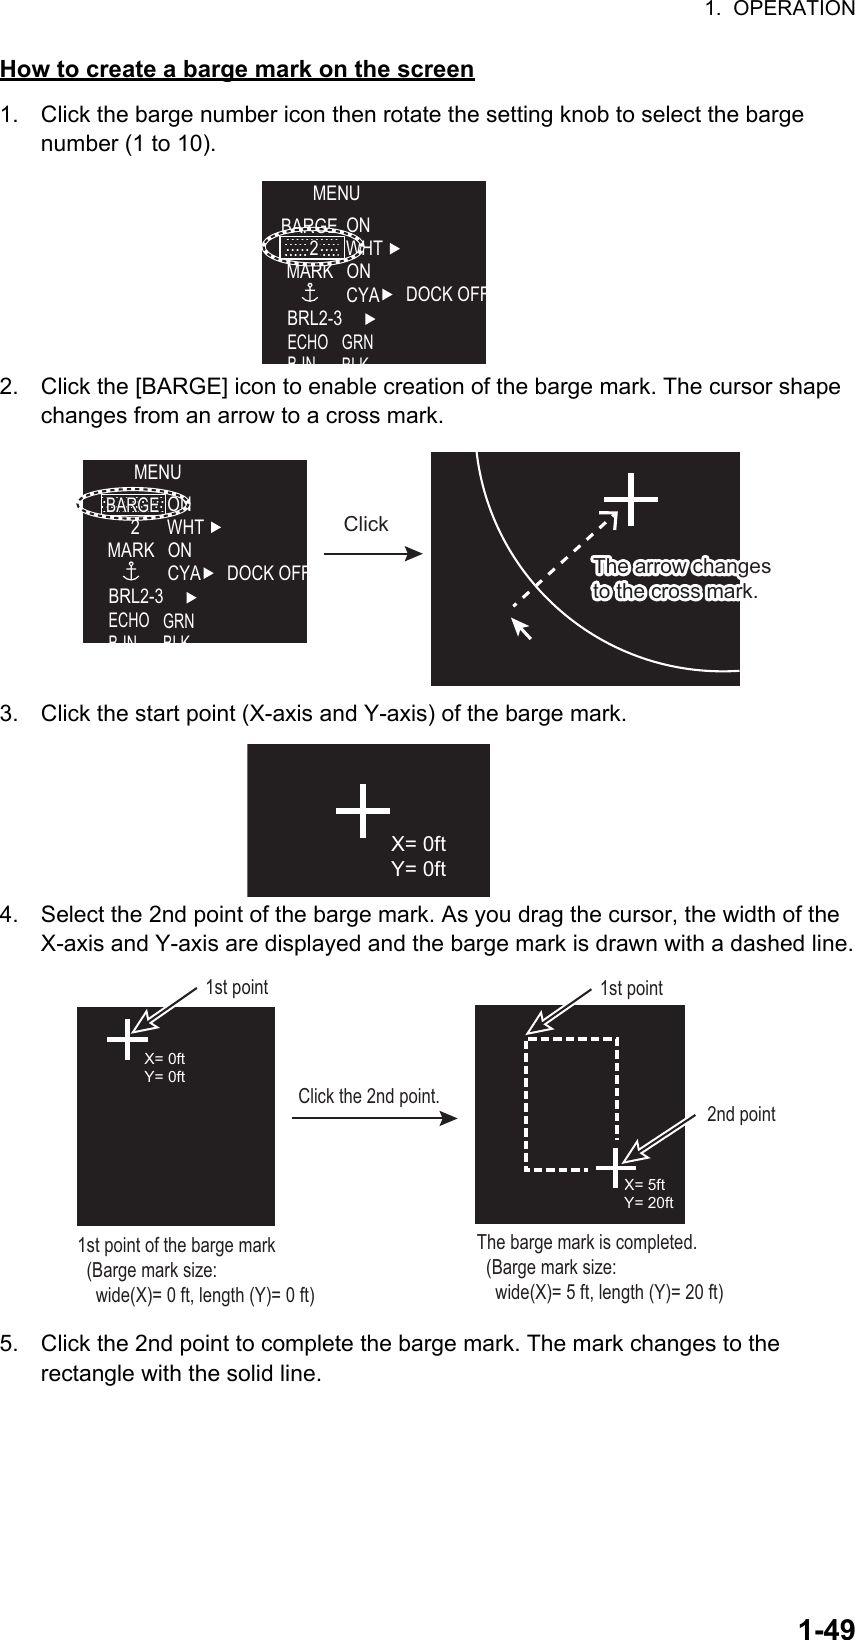 1.  OPERATION1-49How to create a barge mark on the screen1. Click the barge number icon then rotate the setting knob to select the barge     number (1 to 10).2. Click the [BARGE] icon to enable creation of the barge mark. The cursor shape changes from an arrow to a cross mark.3. Click the start point (X-axis and Y-axis) of the barge mark. 4. Select the 2nd point of the barge mark. As you drag the cursor, the width of the  X-axis and Y-axis are displayed and the barge mark is drawn with a dashed line.5. Click the 2nd point to complete the barge mark. The mark changes to the           rectangle with the solid line.MENUBARGE ONWHTONCYA DOCK OFFBRL2-3ECHOBINGRNBLKMARKMARK22MENUONWHTONCYA DOCK OFFBRL2-3ECHOBINGRNBLKMARKMARK22BARGEBARGEThe arrow changes to the cross mark.The arrow changes to the cross mark.ClickX= 0ftY= 0ftX= 0ftY= 0ftX= 5ftY= 20ft1st point of the barge mark  (Barge mark size:     wide(X)= 0 ft, length (Y)= 0 ft)Click the 2nd point.The barge mark is completed.  (Barge mark size:     wide(X)= 5 ft, length (Y)= 20 ft)1st point2nd point1st point